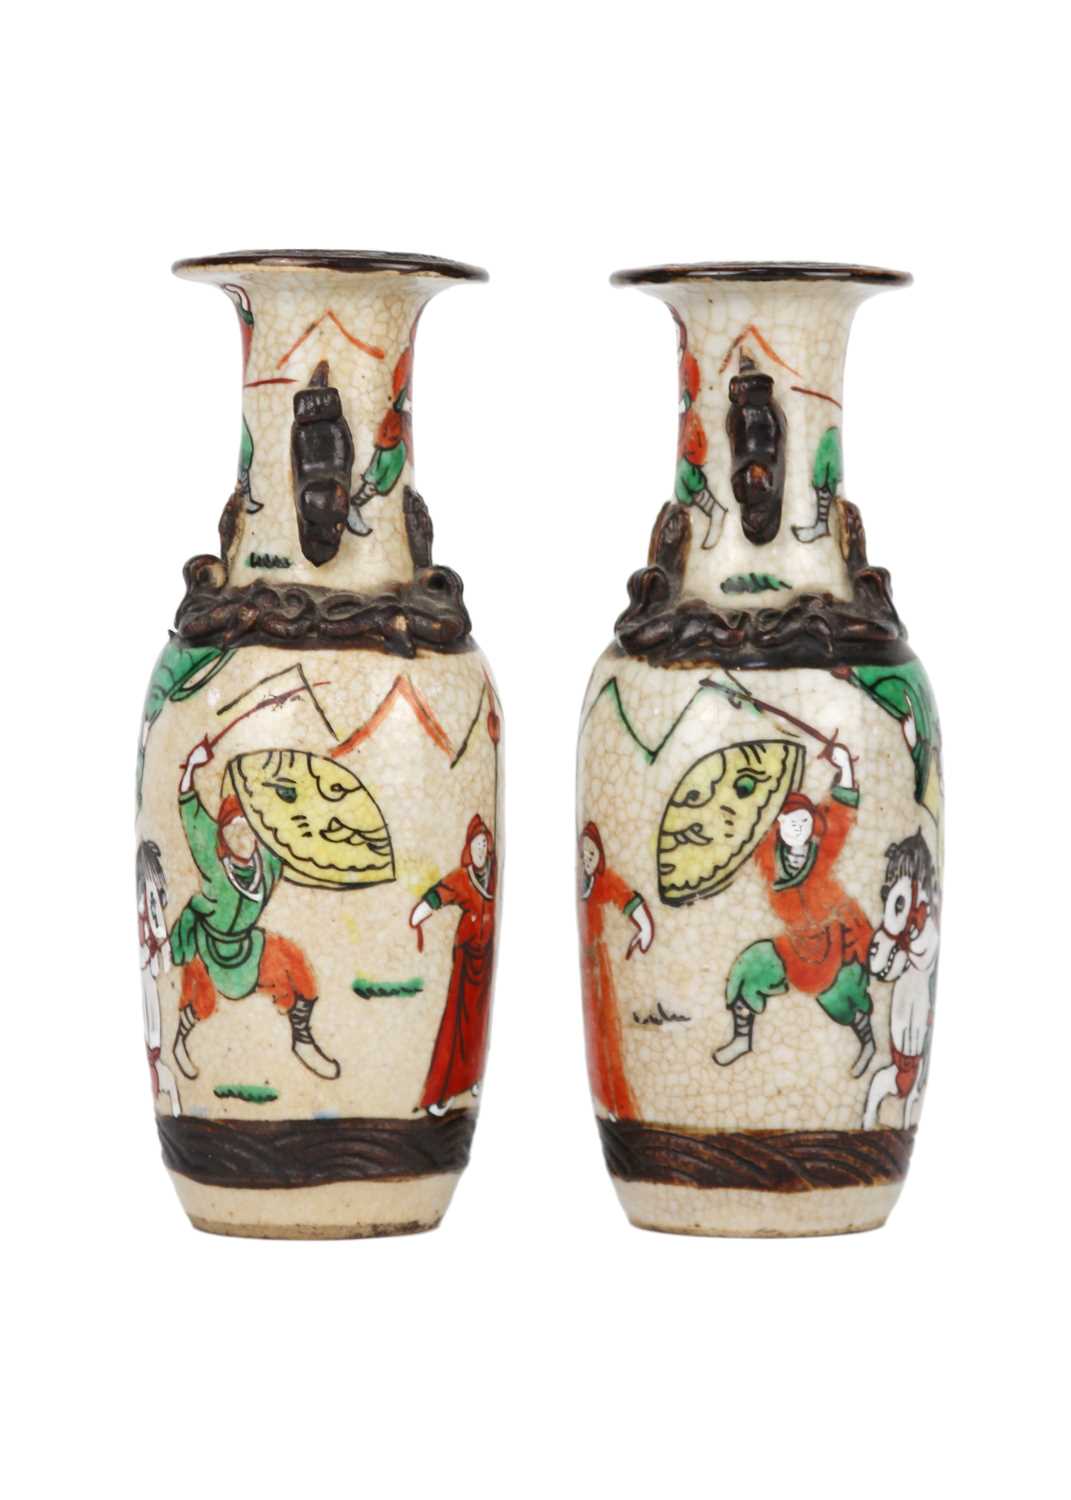 A pair of Chinese crackle glazed vases, 19th century. - Image 2 of 6